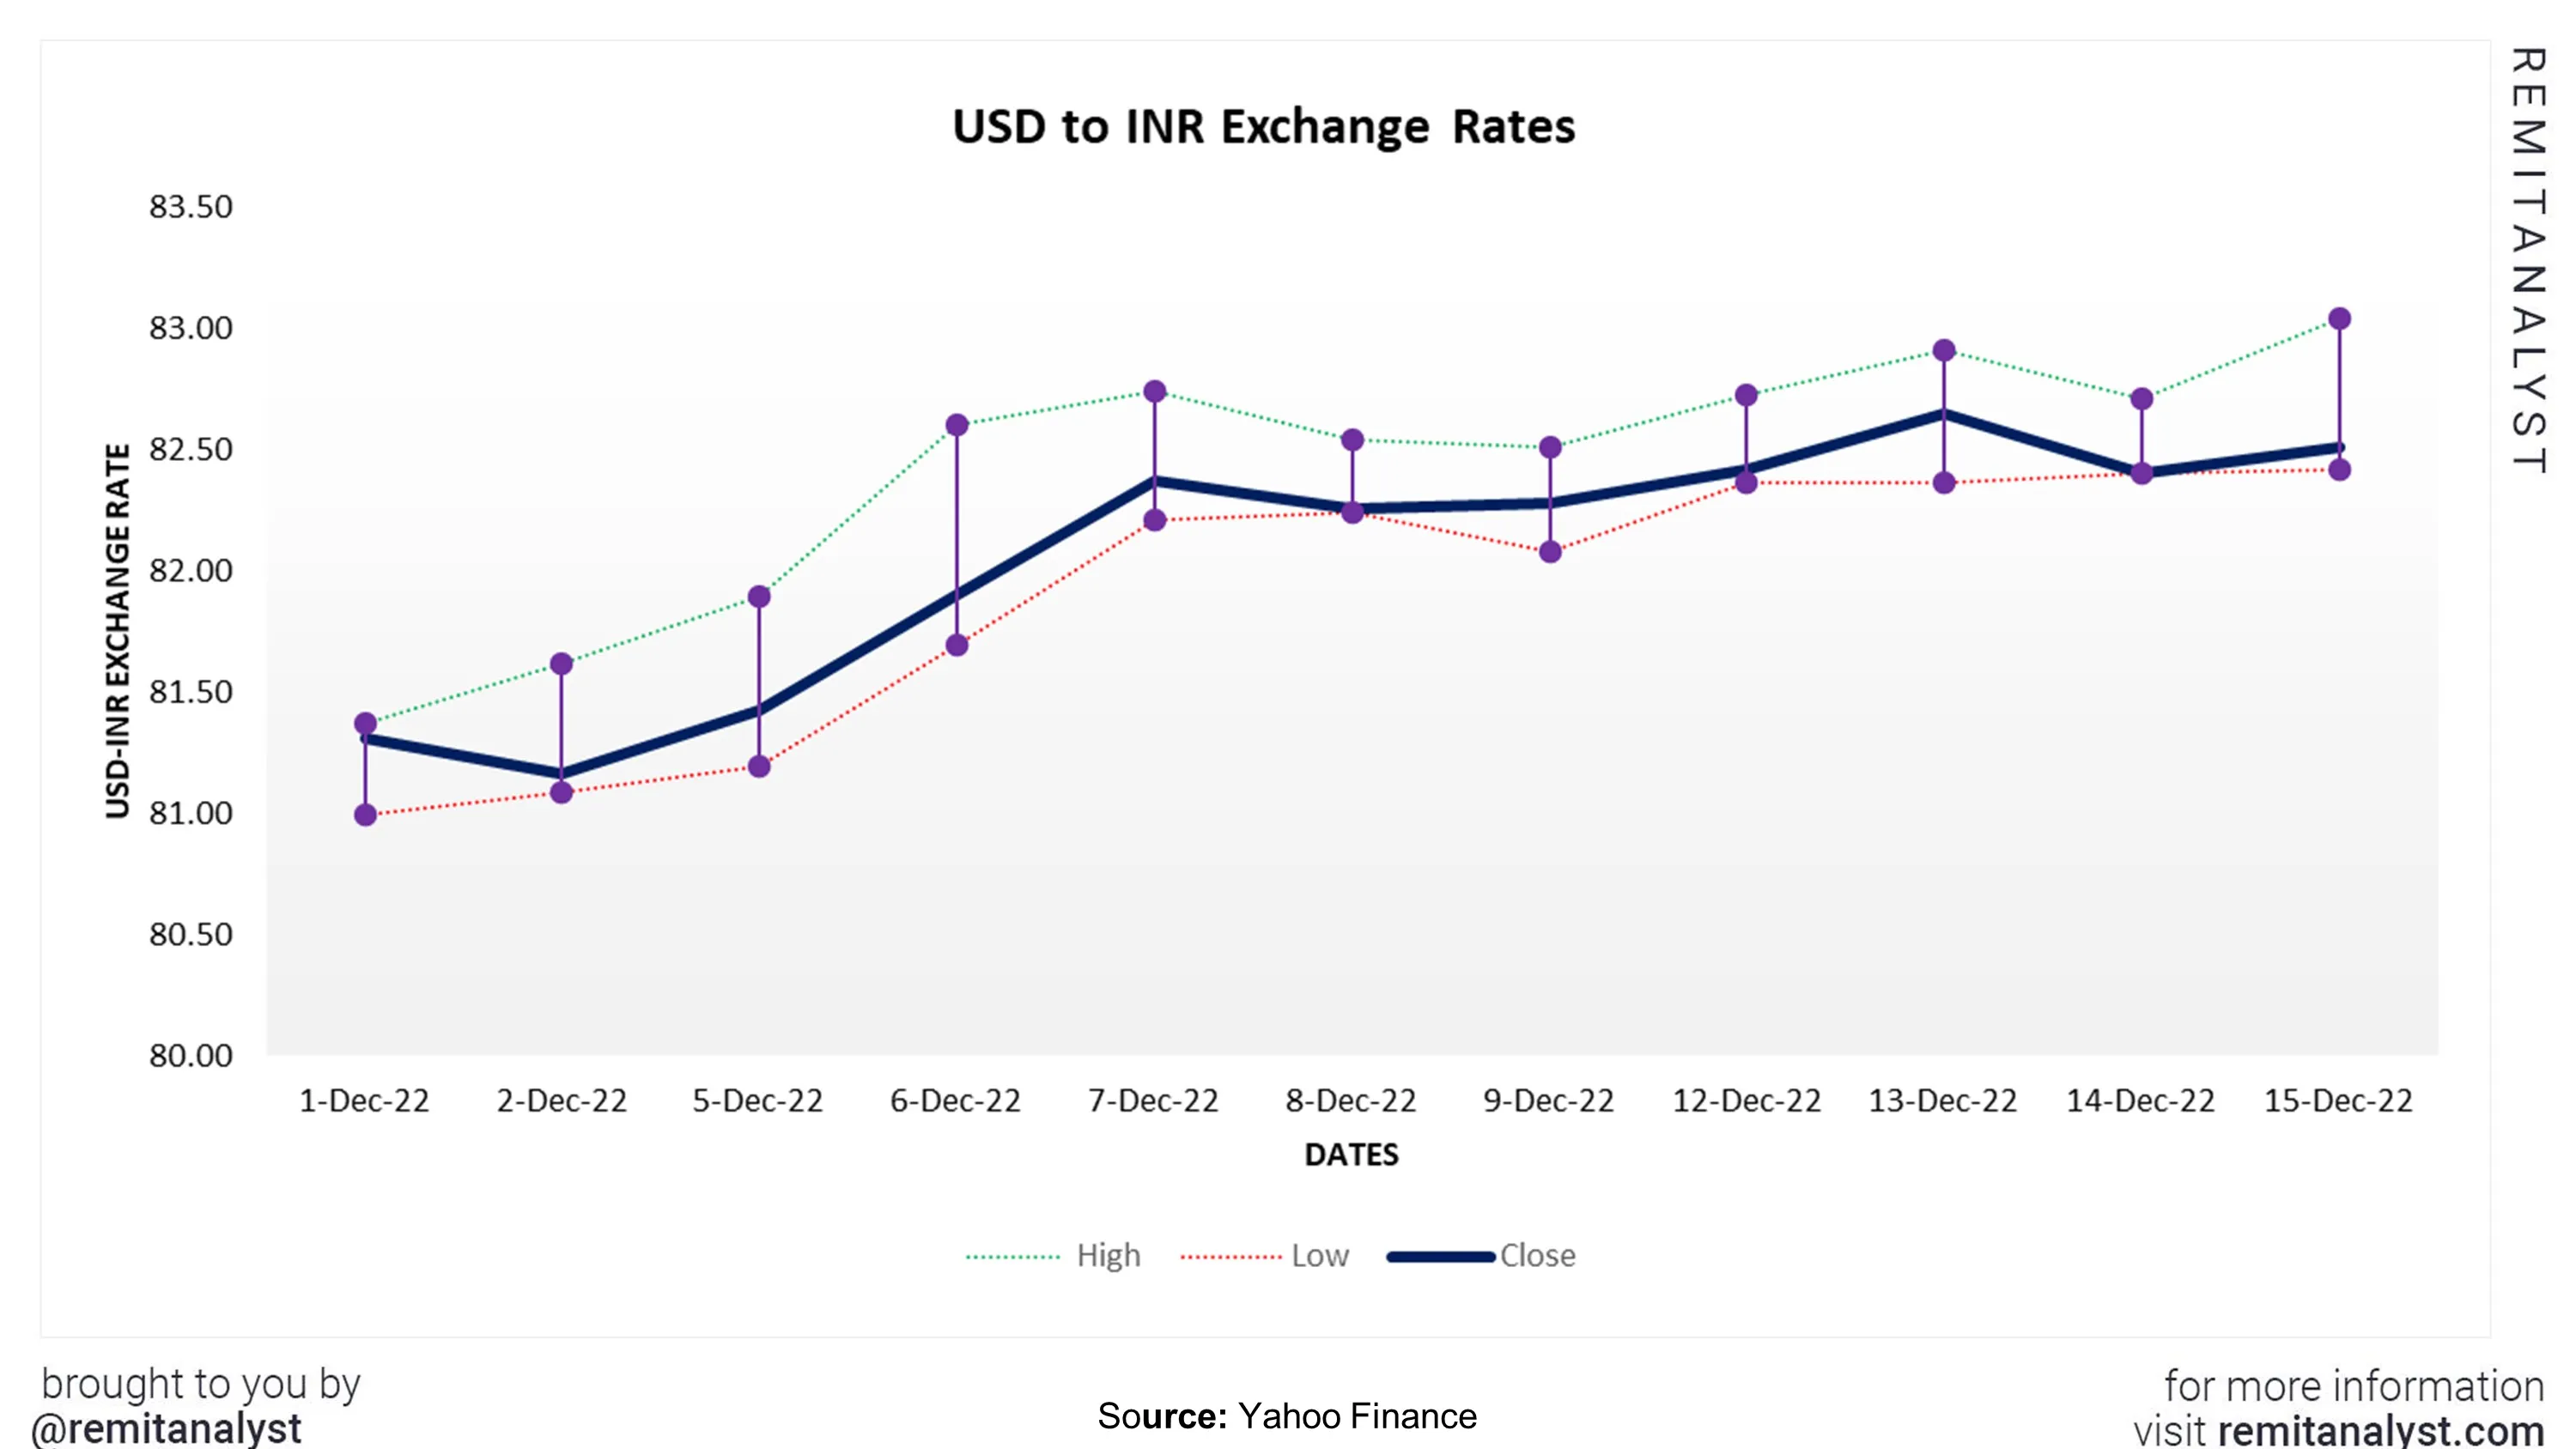 usd-to-inr-exchange-rate-from-1-dec-2022-to-15-dec-2022